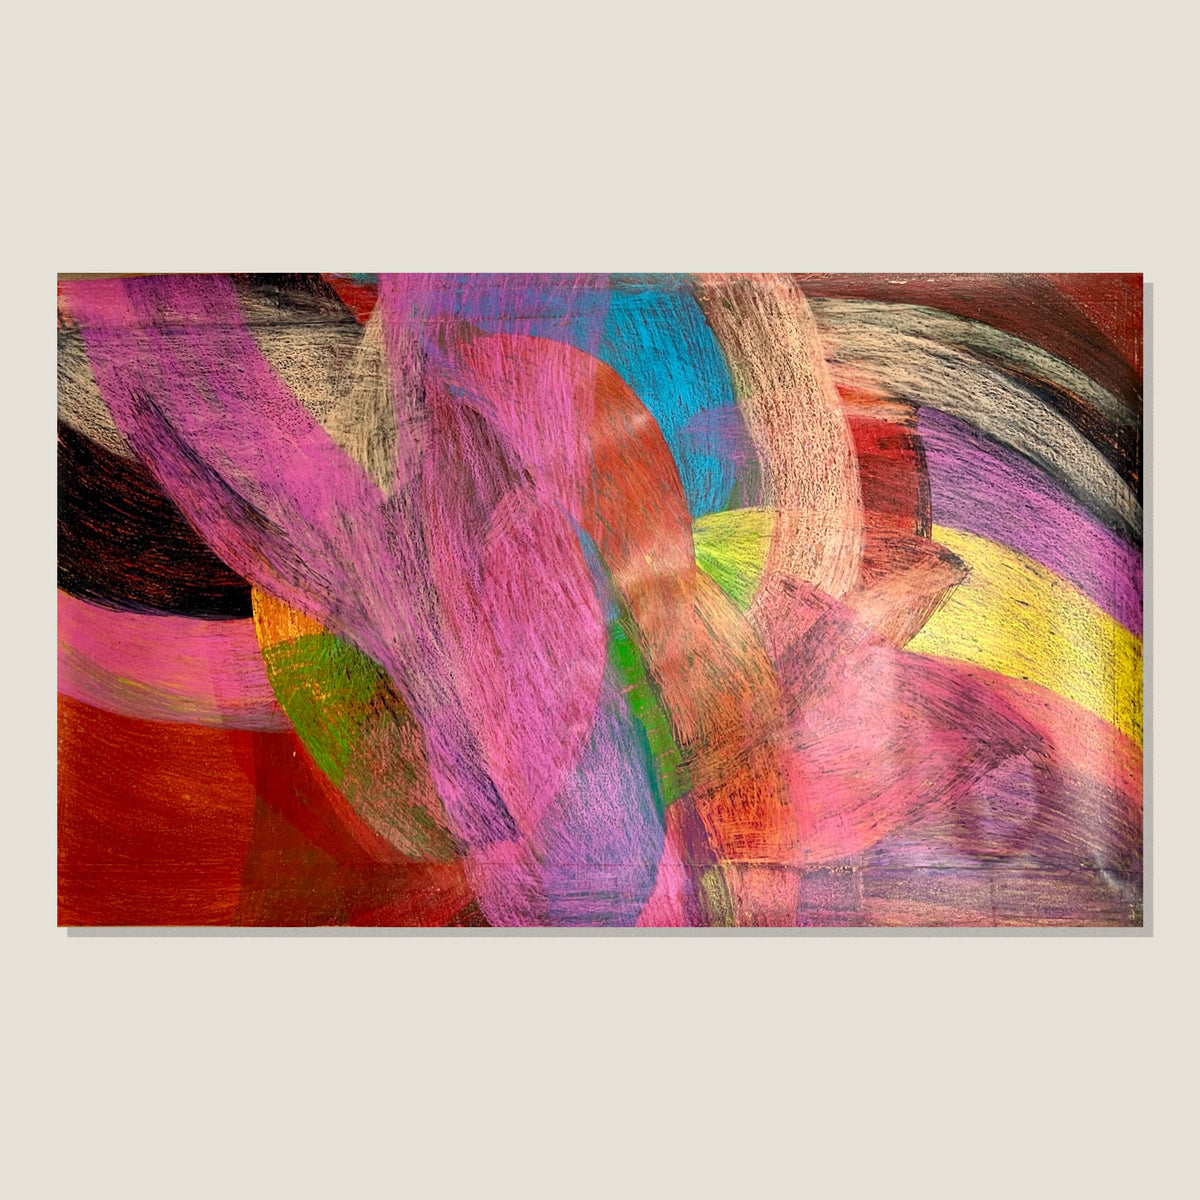 Untitled (Collision Of Colour)